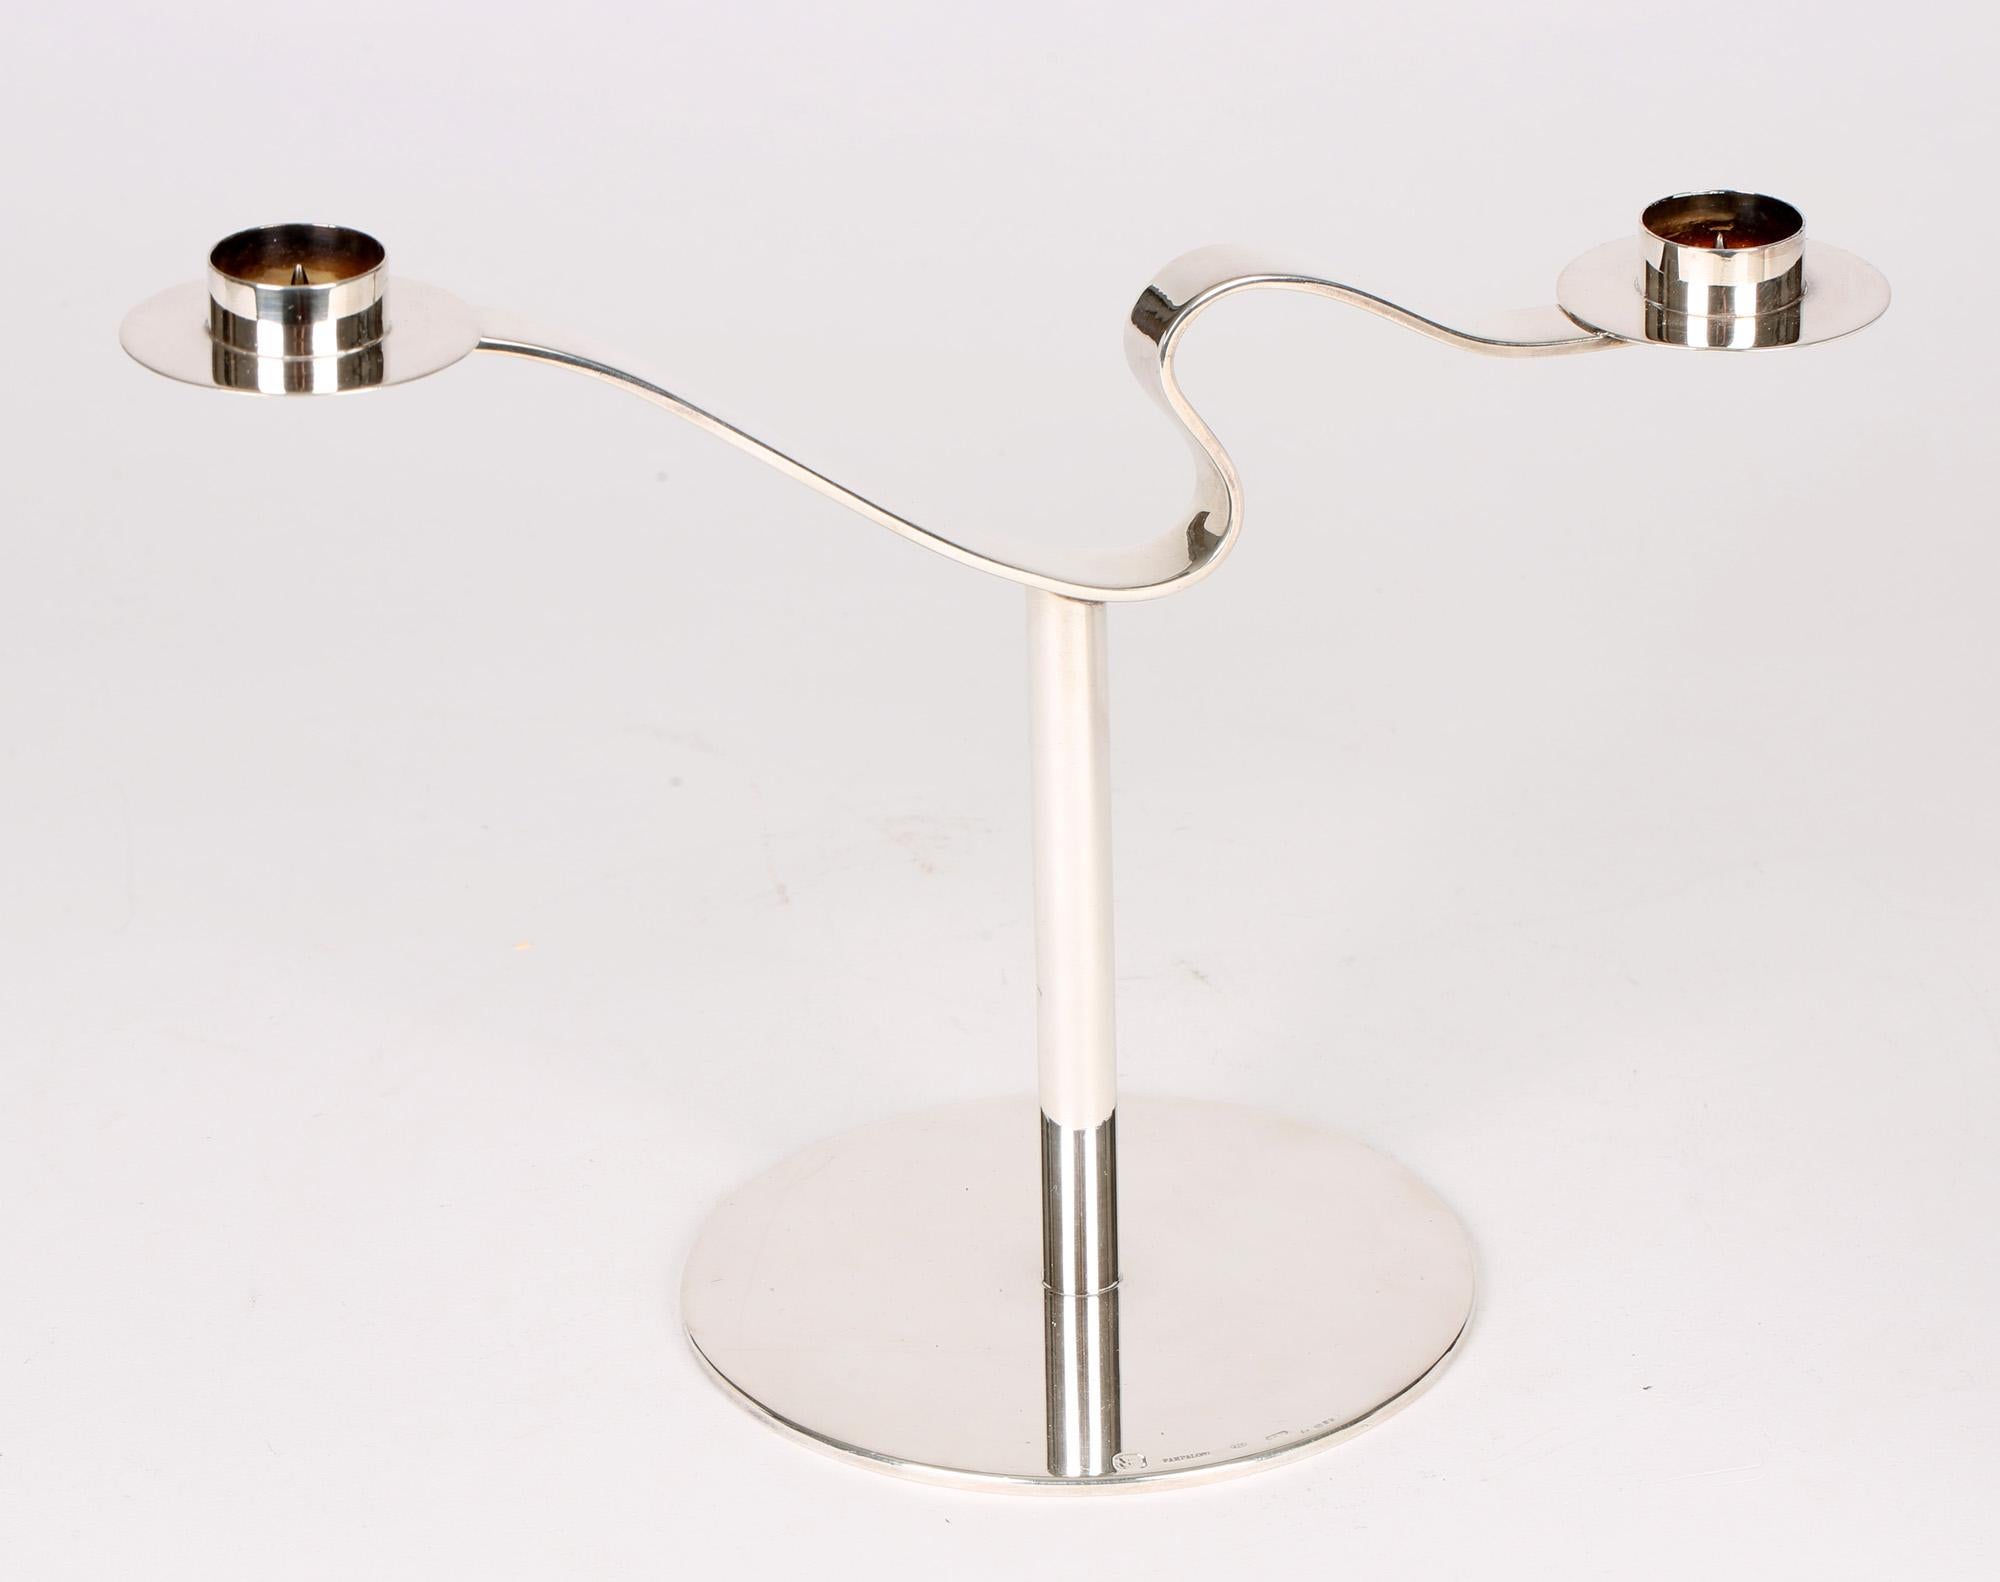 A exceptional quality and heavy gauge Italian silver modernist twin candlestick by Pampaloni of Florence with London silver import marks for 2003. The candlestick stands on thick flat rounded base with a narrow rounded column stem supporting a